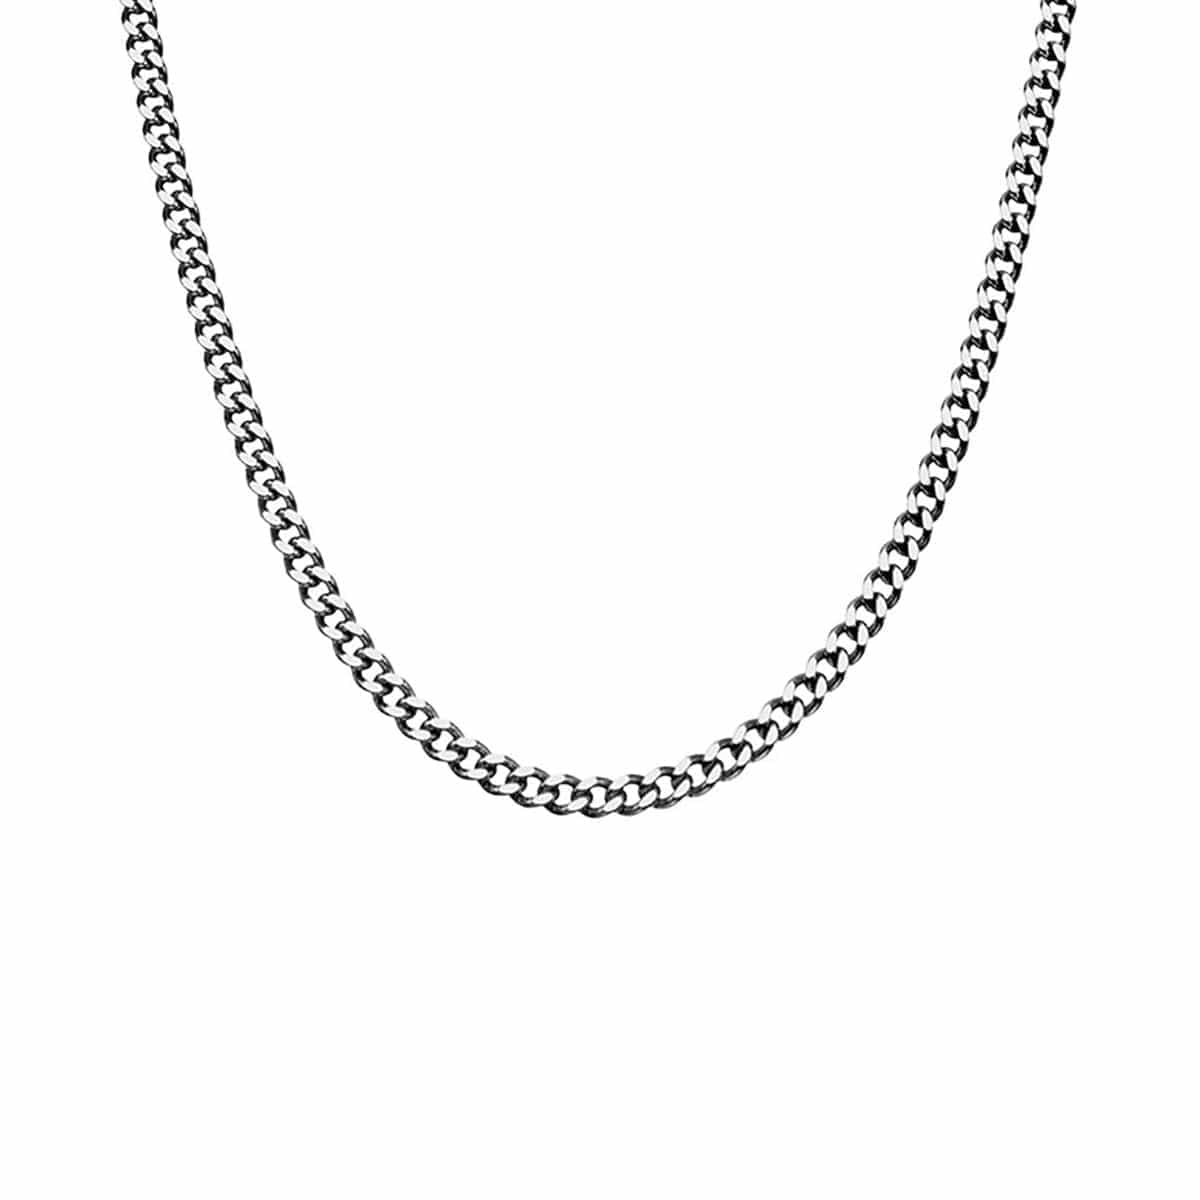 INOX JEWELRY Chains Silver Tone Stainless Steel Polished 5mm Diamond Cut Design Chain